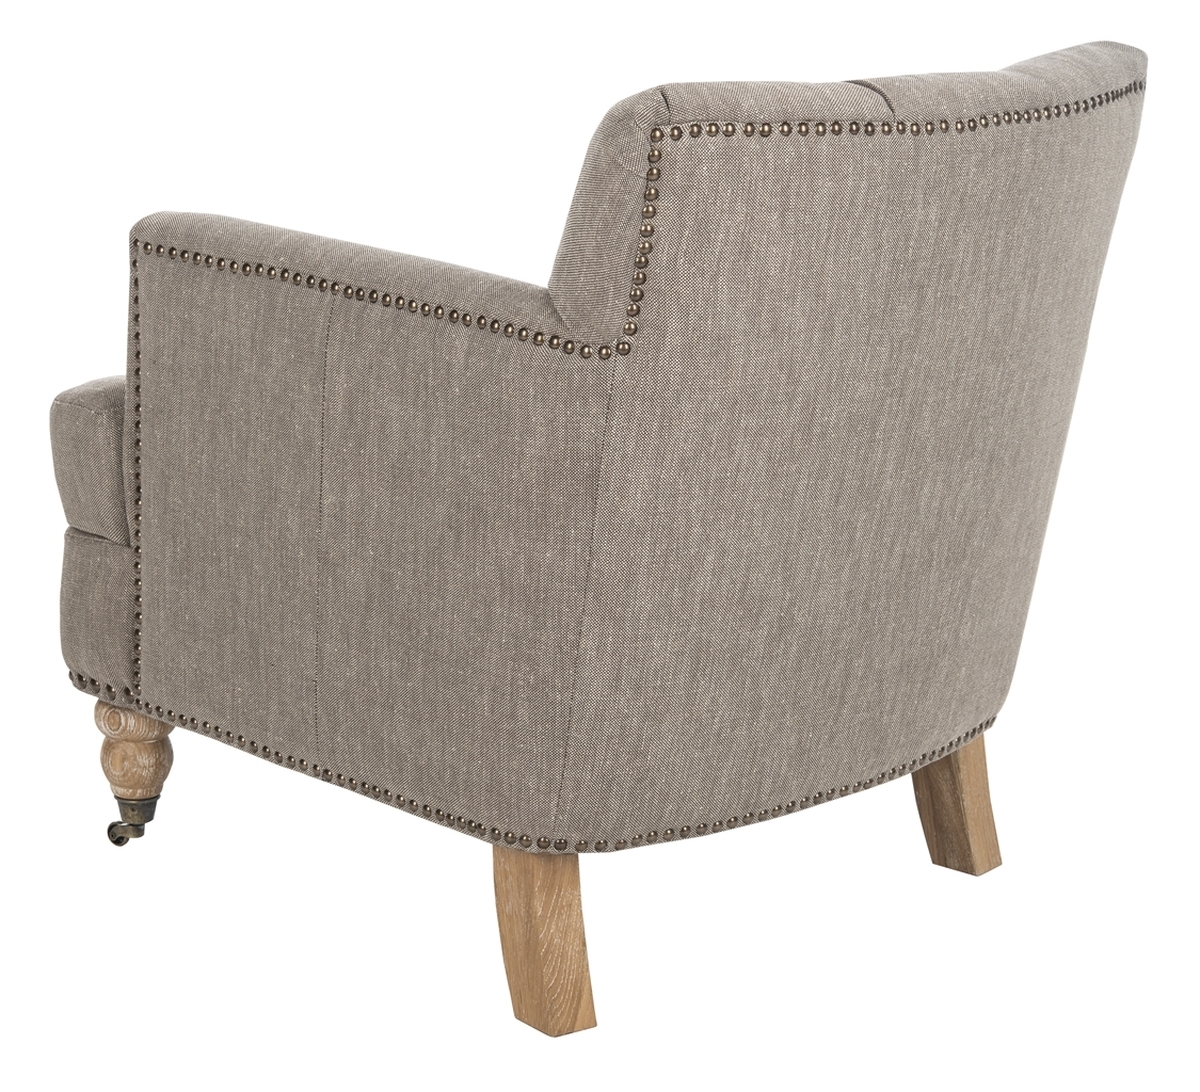 Colin Tufted Club Chair - Taupe/White Wash - Arlo Home - Image 4